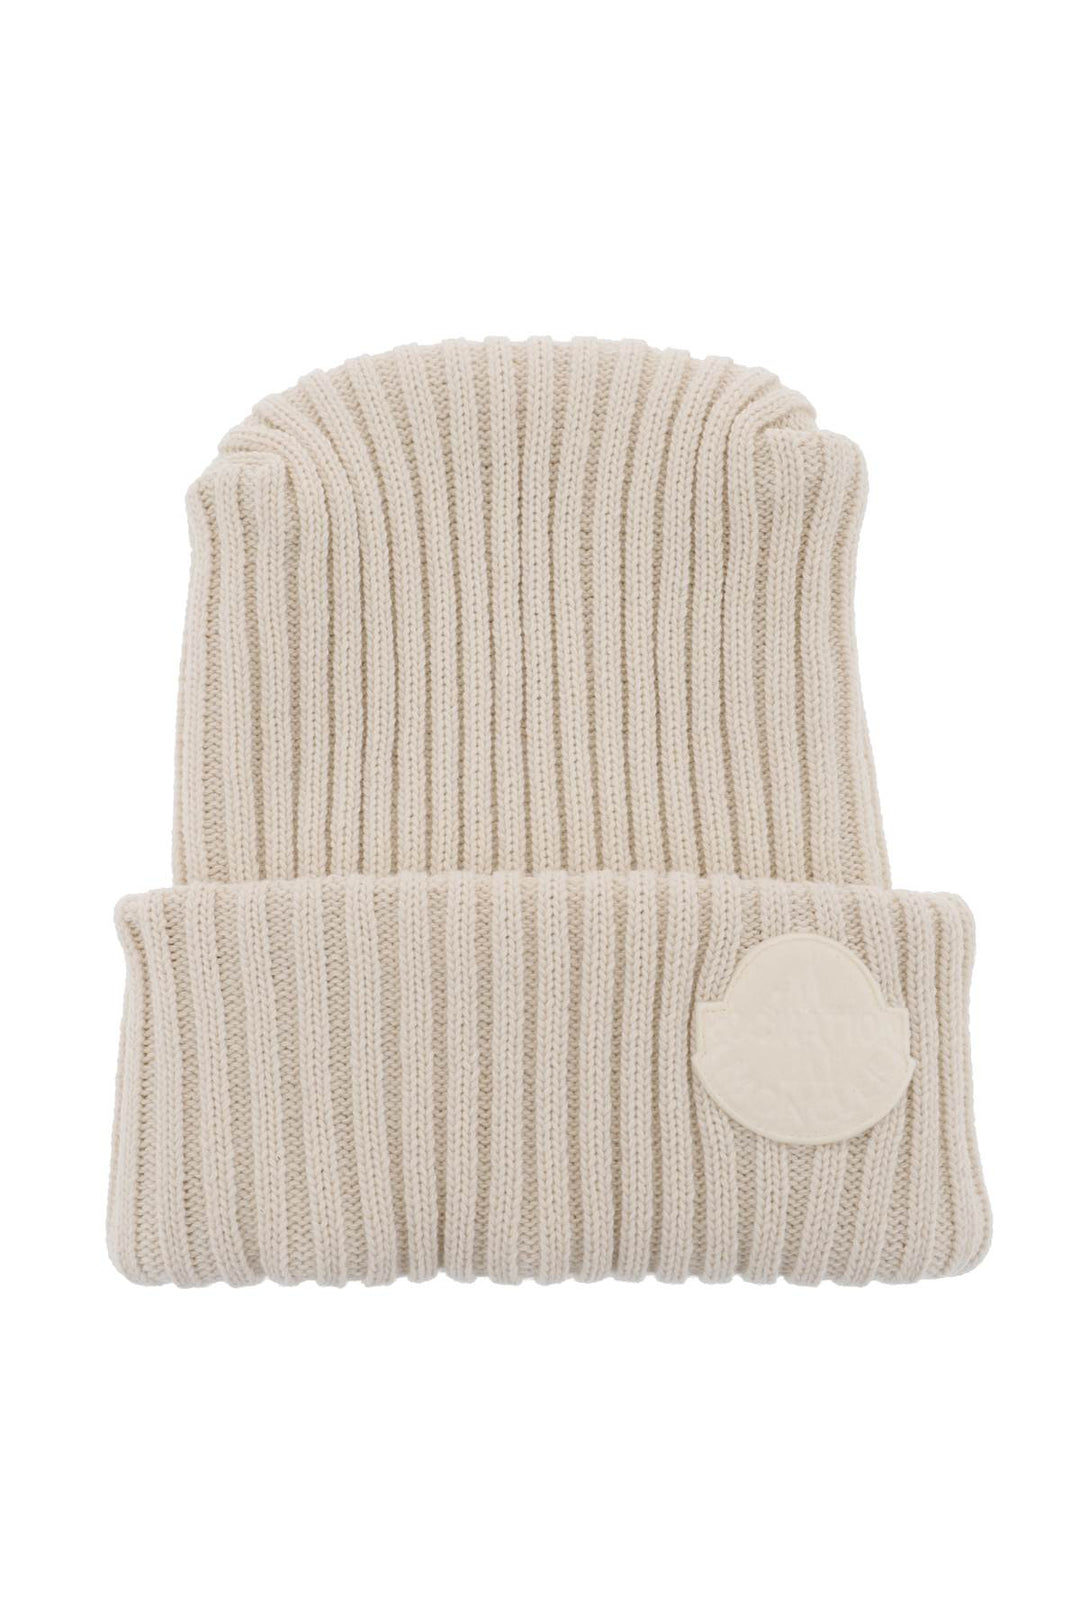 Moncler X Roc Nation By Jay Z Tricot Beanie Hat   Bianco